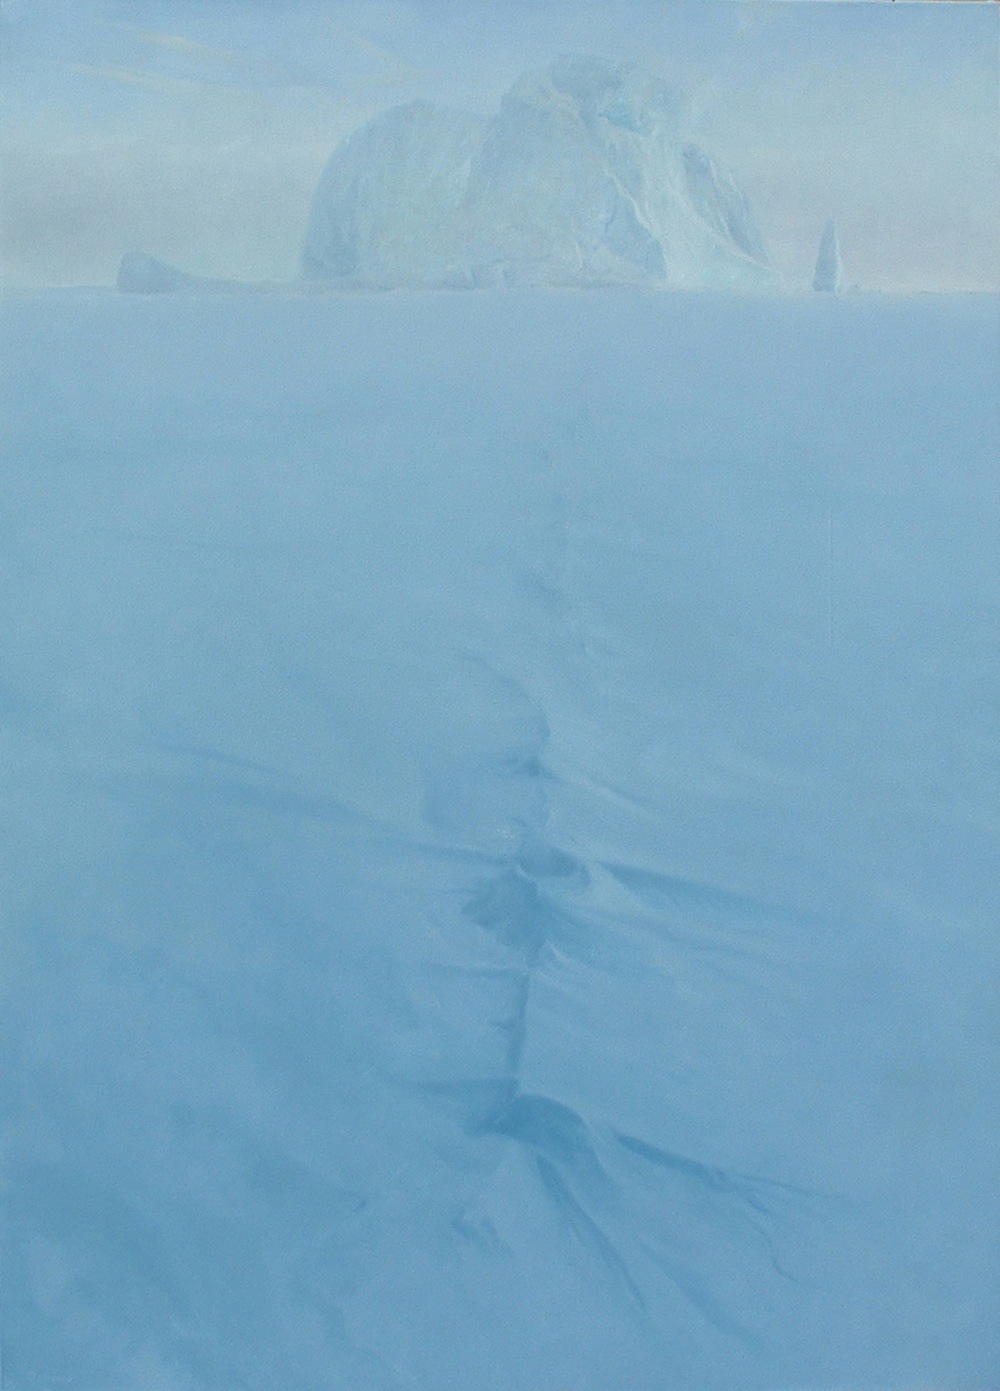    Trapped Berg,  152cm x 90cm, oil on canvas, 2004.  